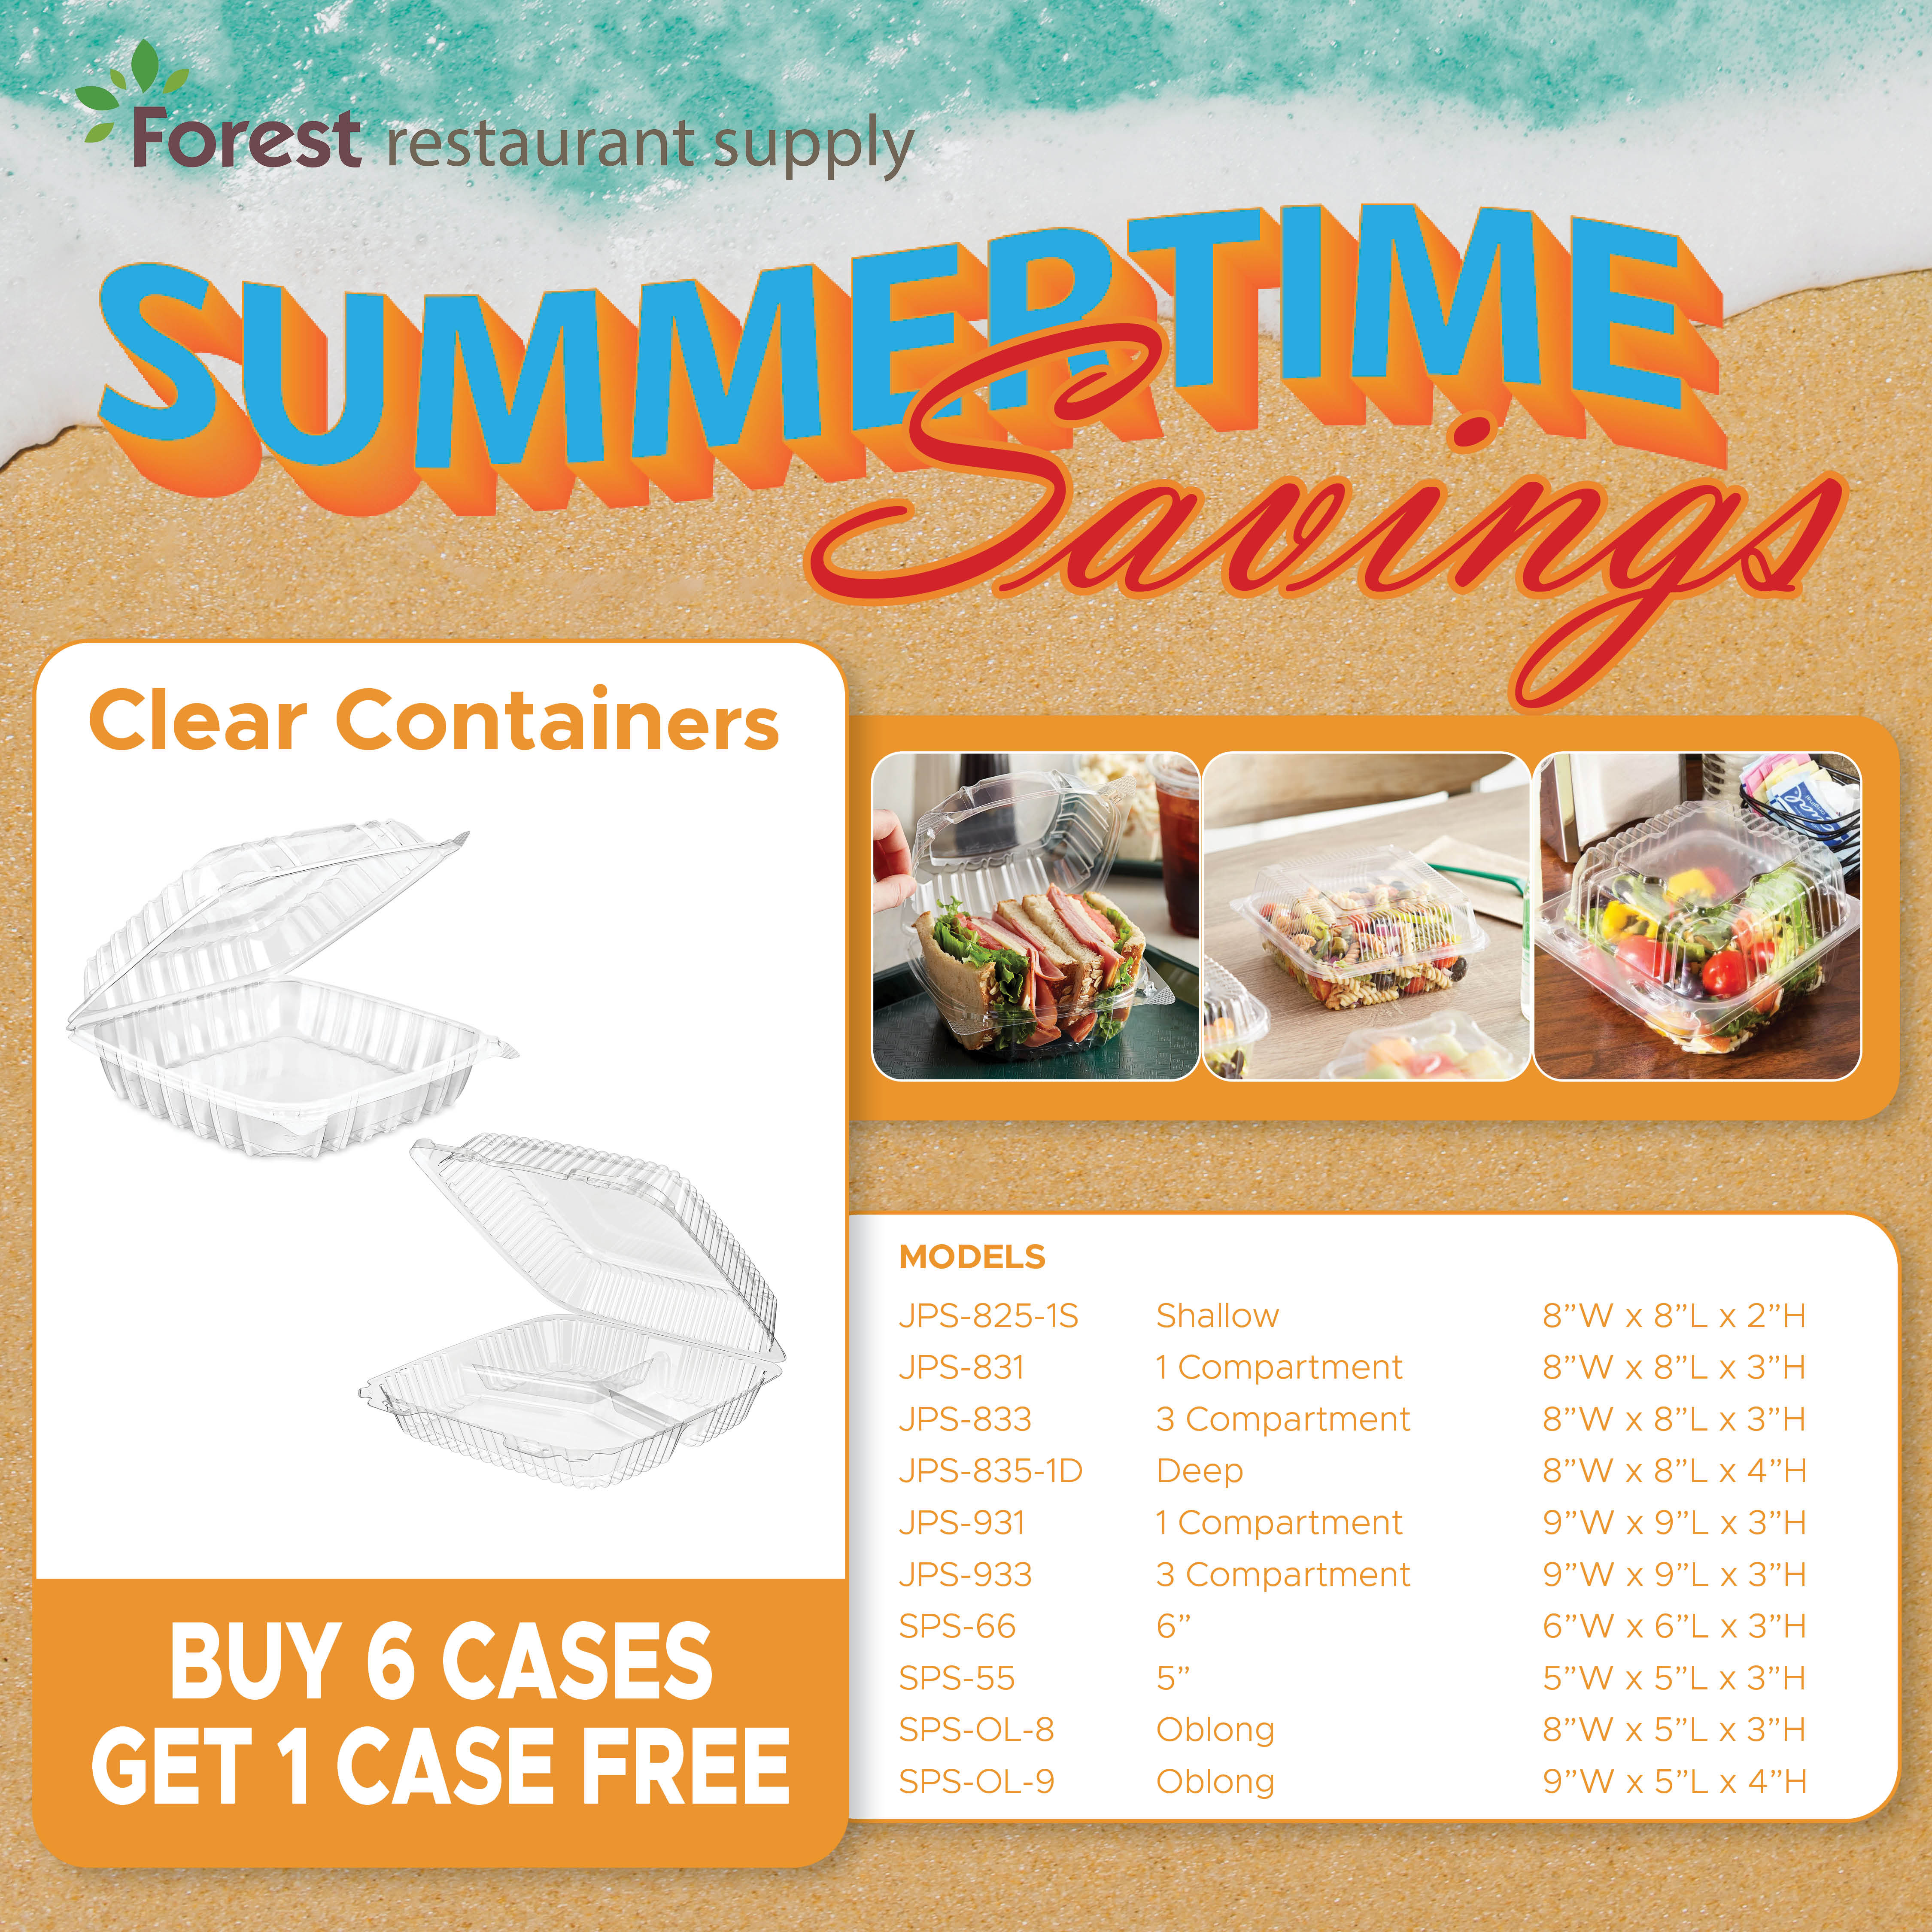 Buy 6 get 1 FREE -Clear container